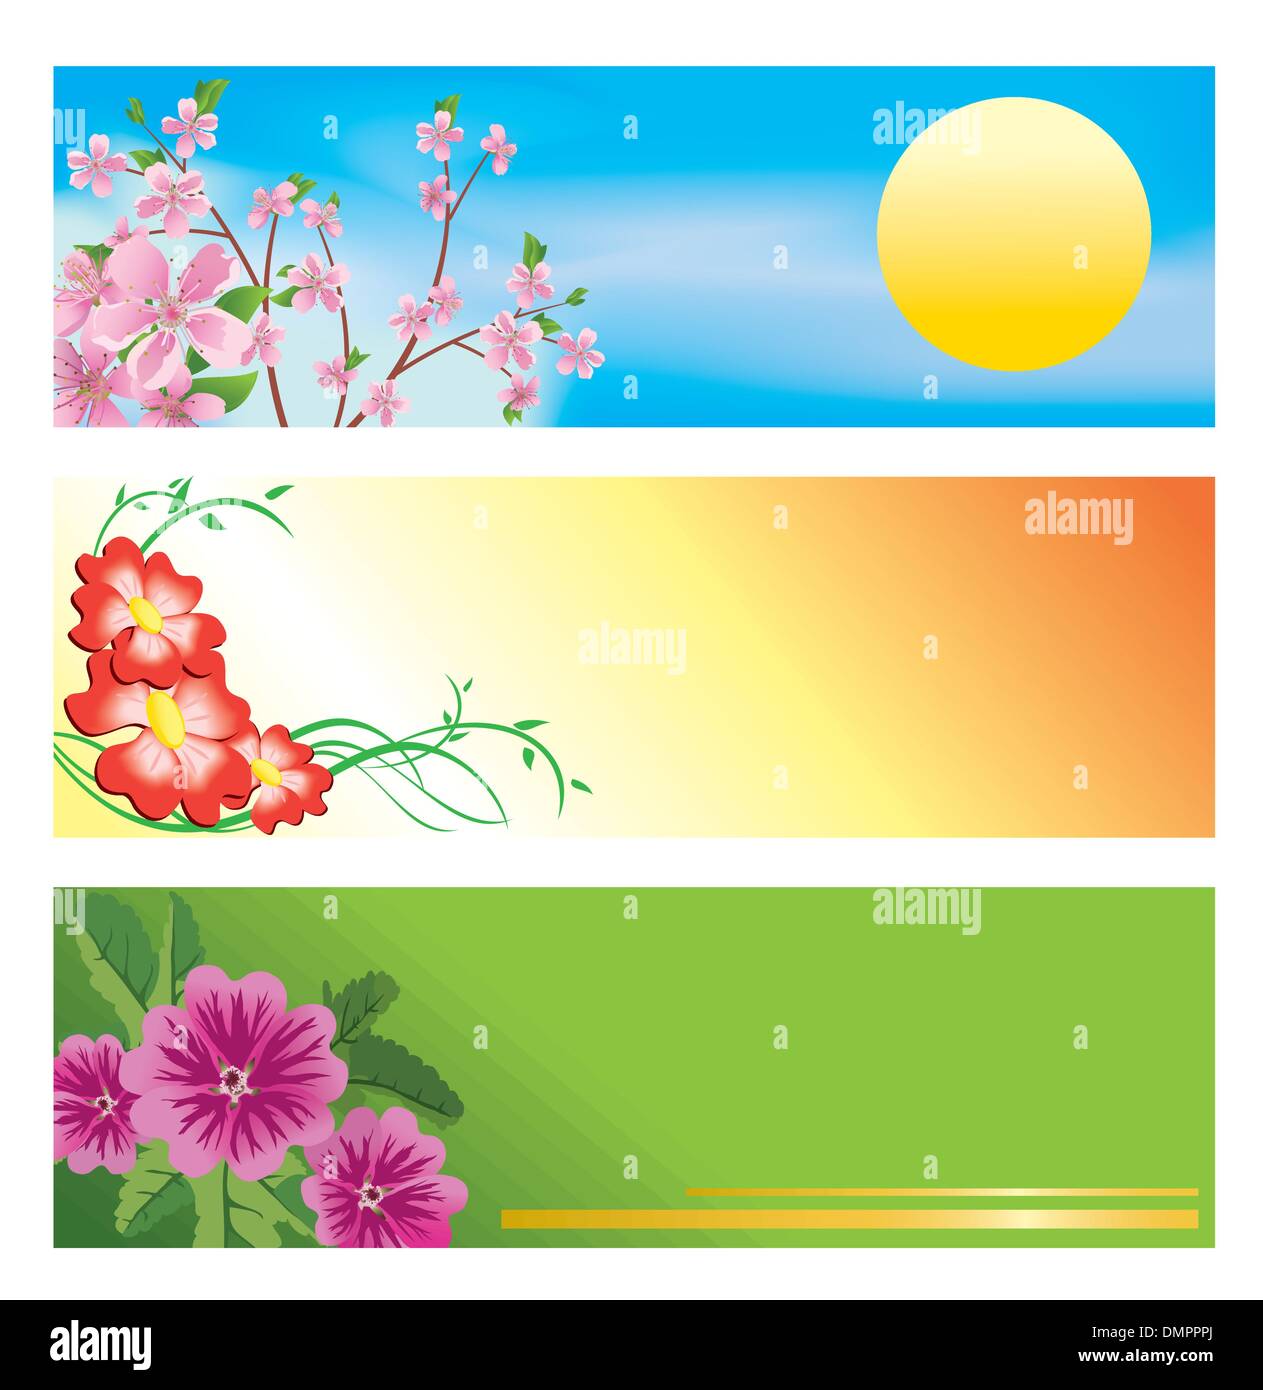 vector set of horizontal banners with floral themes Stock Vector